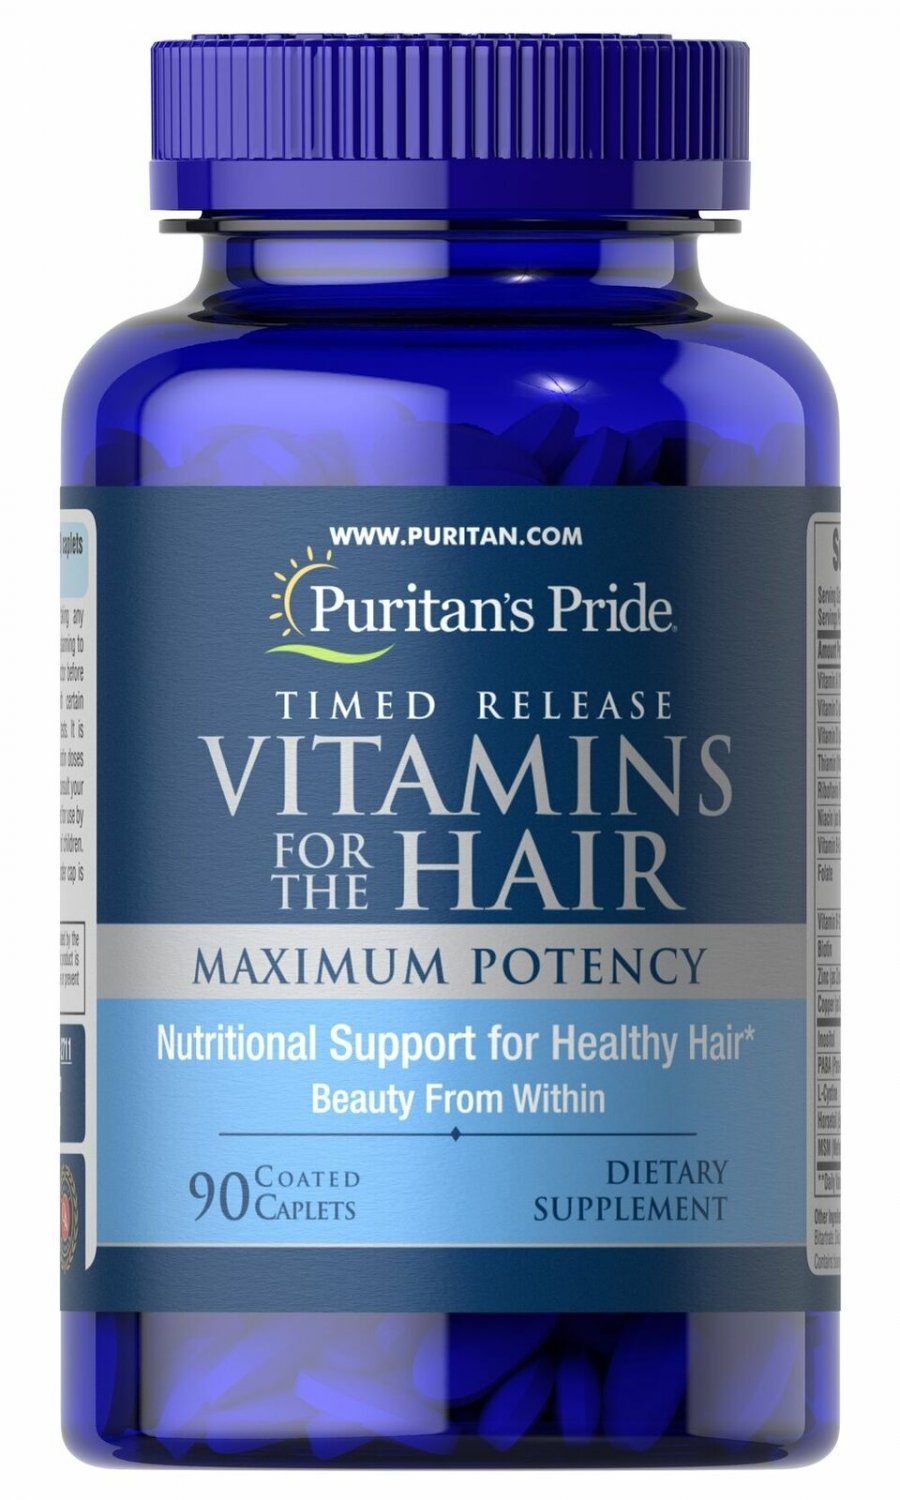 Puritan's Pride Vitamins for the Hair Timed Release - 90 Tablets